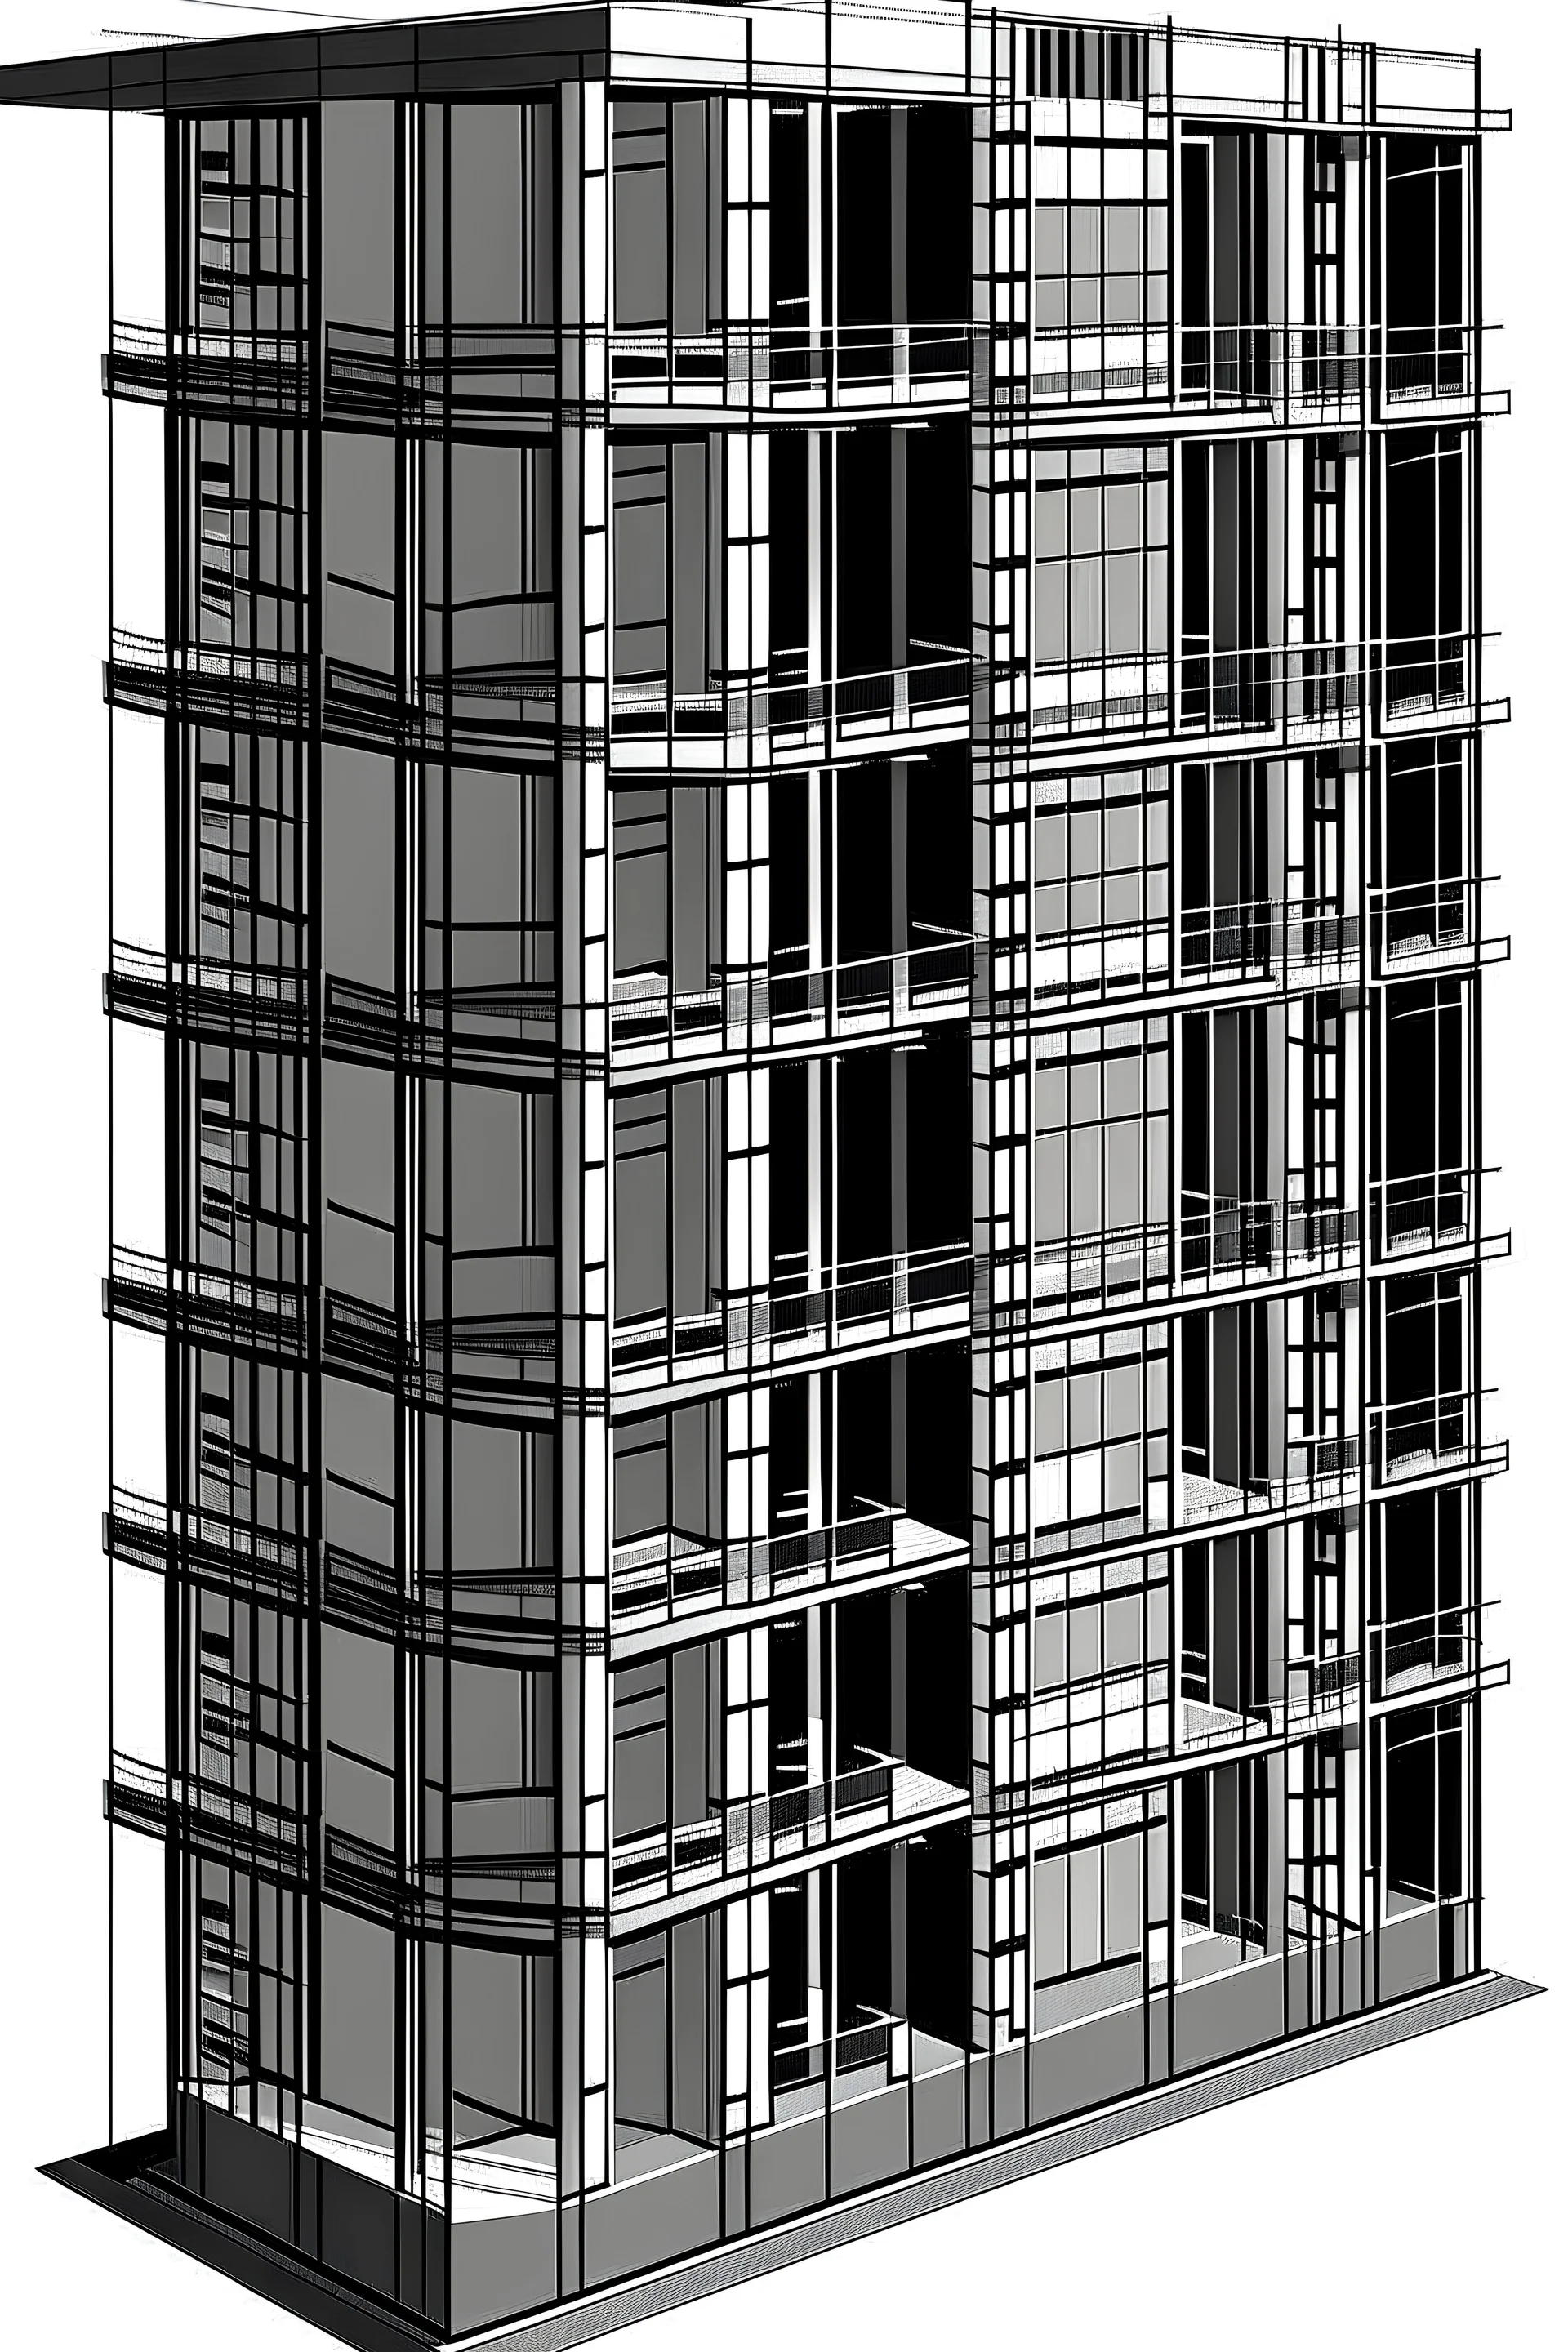 make modern facades for this form and make it real bulding